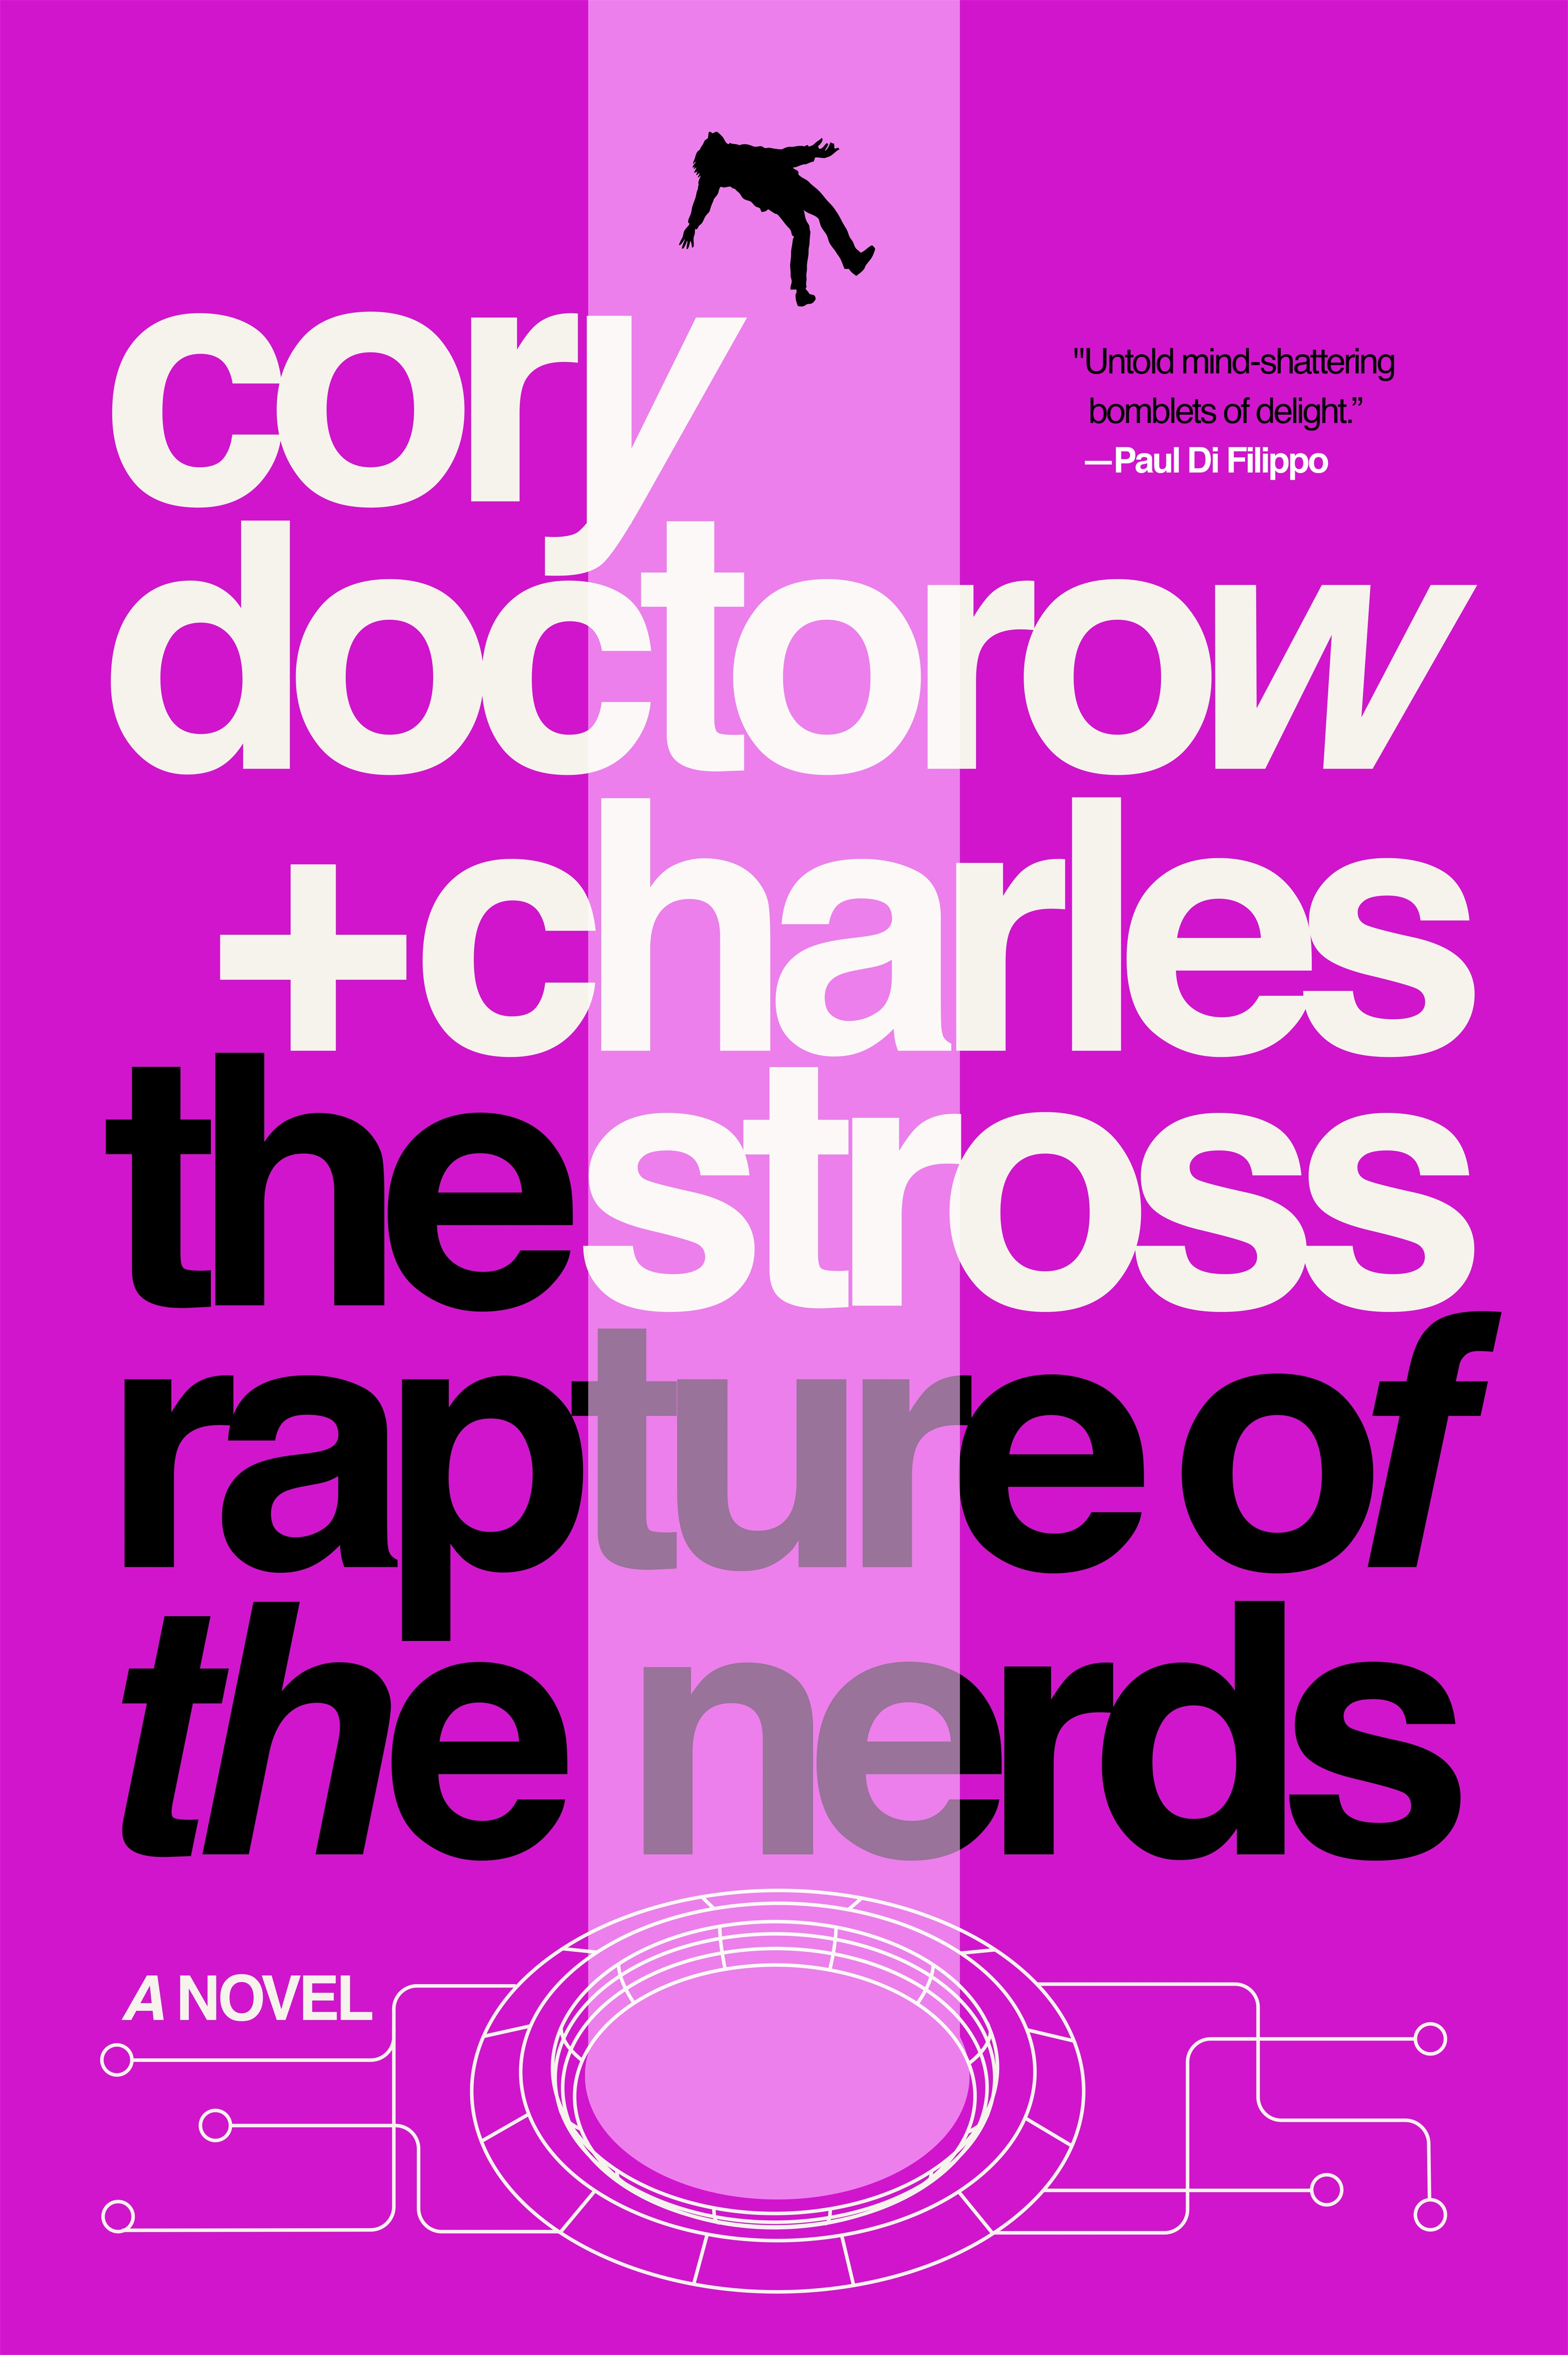 The Rapture of the Nerds : A tale of the singularity, posthumanity, and awkward social situations by Cory Doctorow, Charles Stross